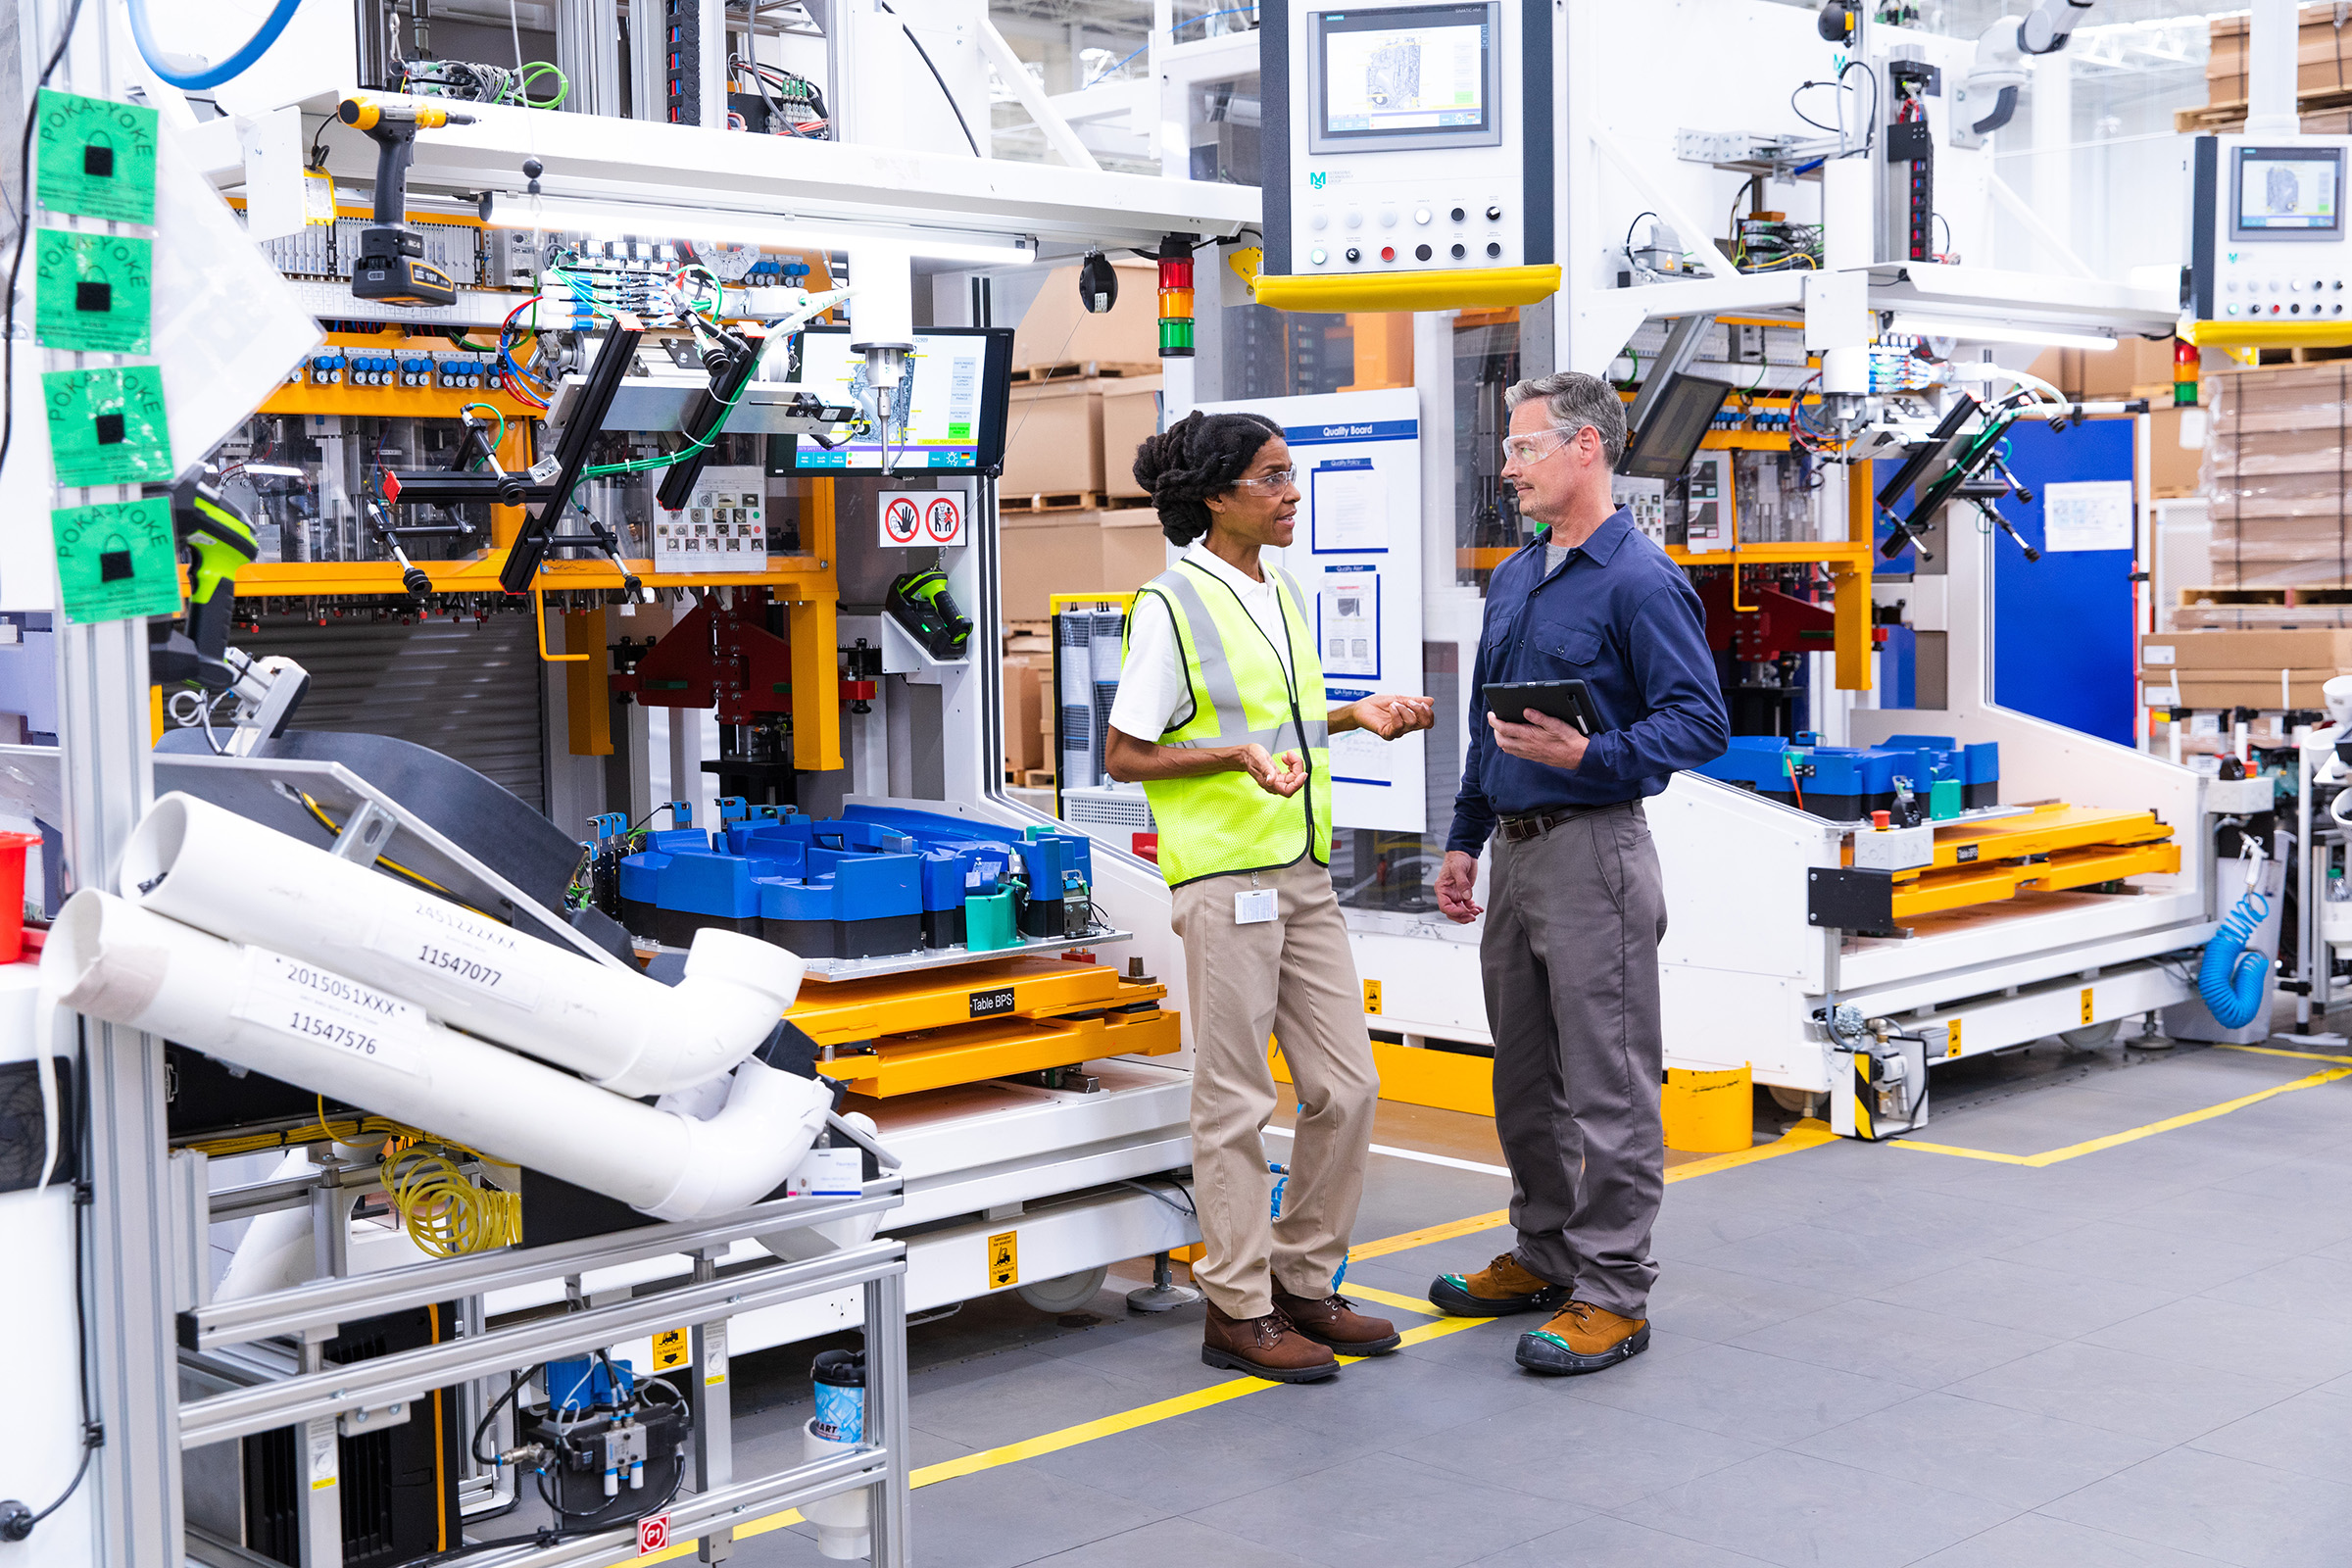 Man with a tablet and woman wearing a yellow safety vest talking in an industrial facility warehouse